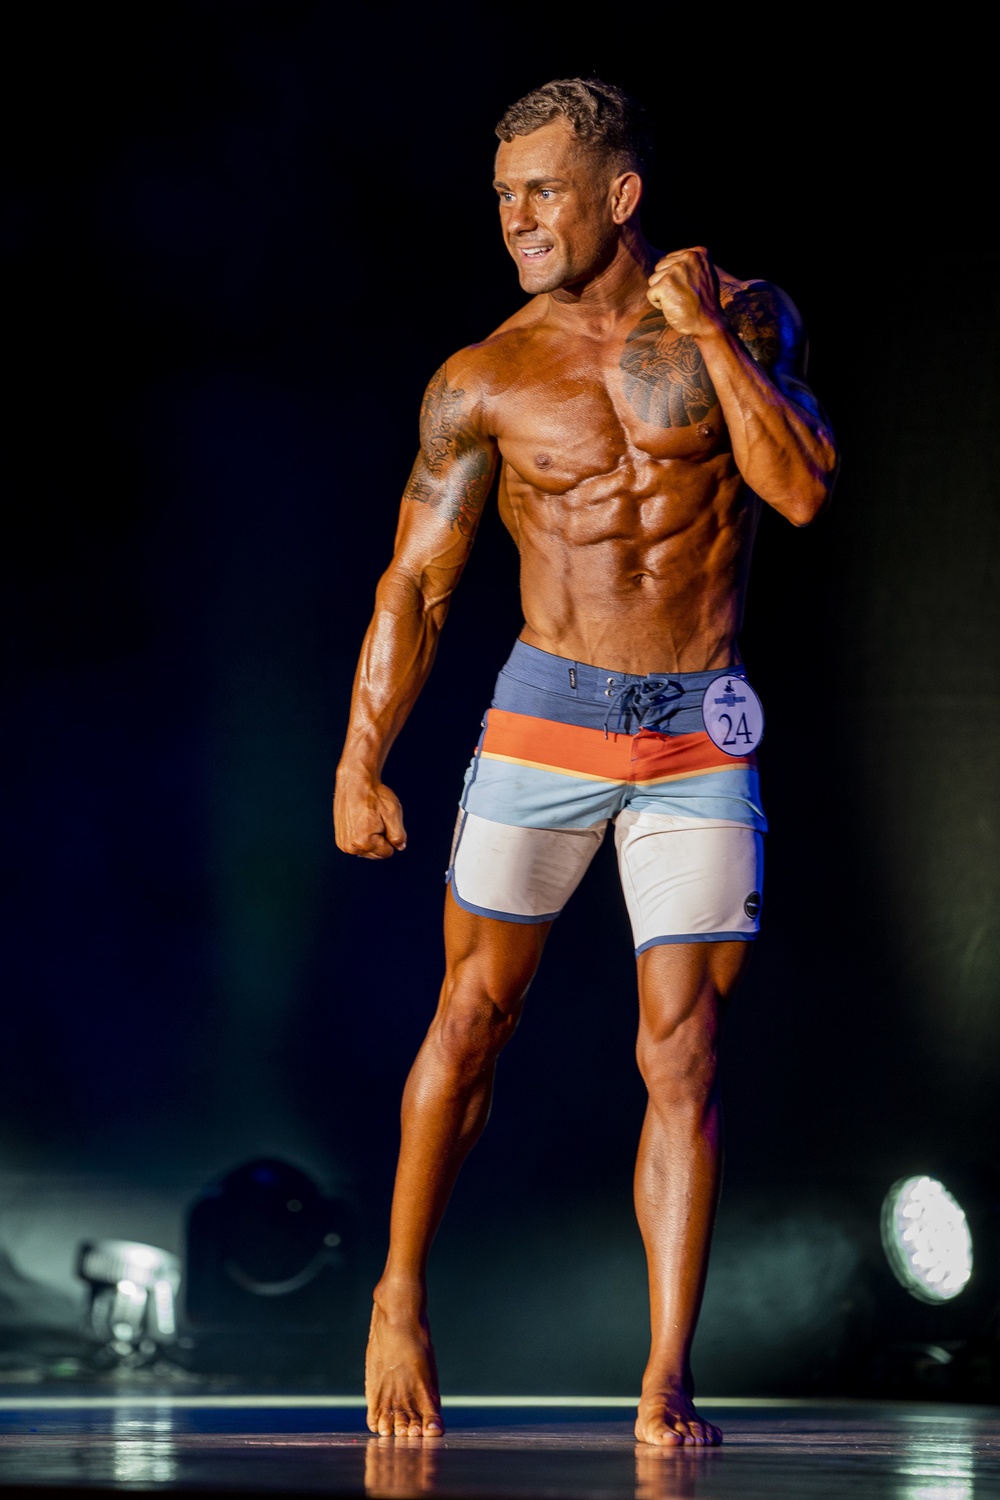 2021 Far East Bodybuilding Competition: Beasts of the East